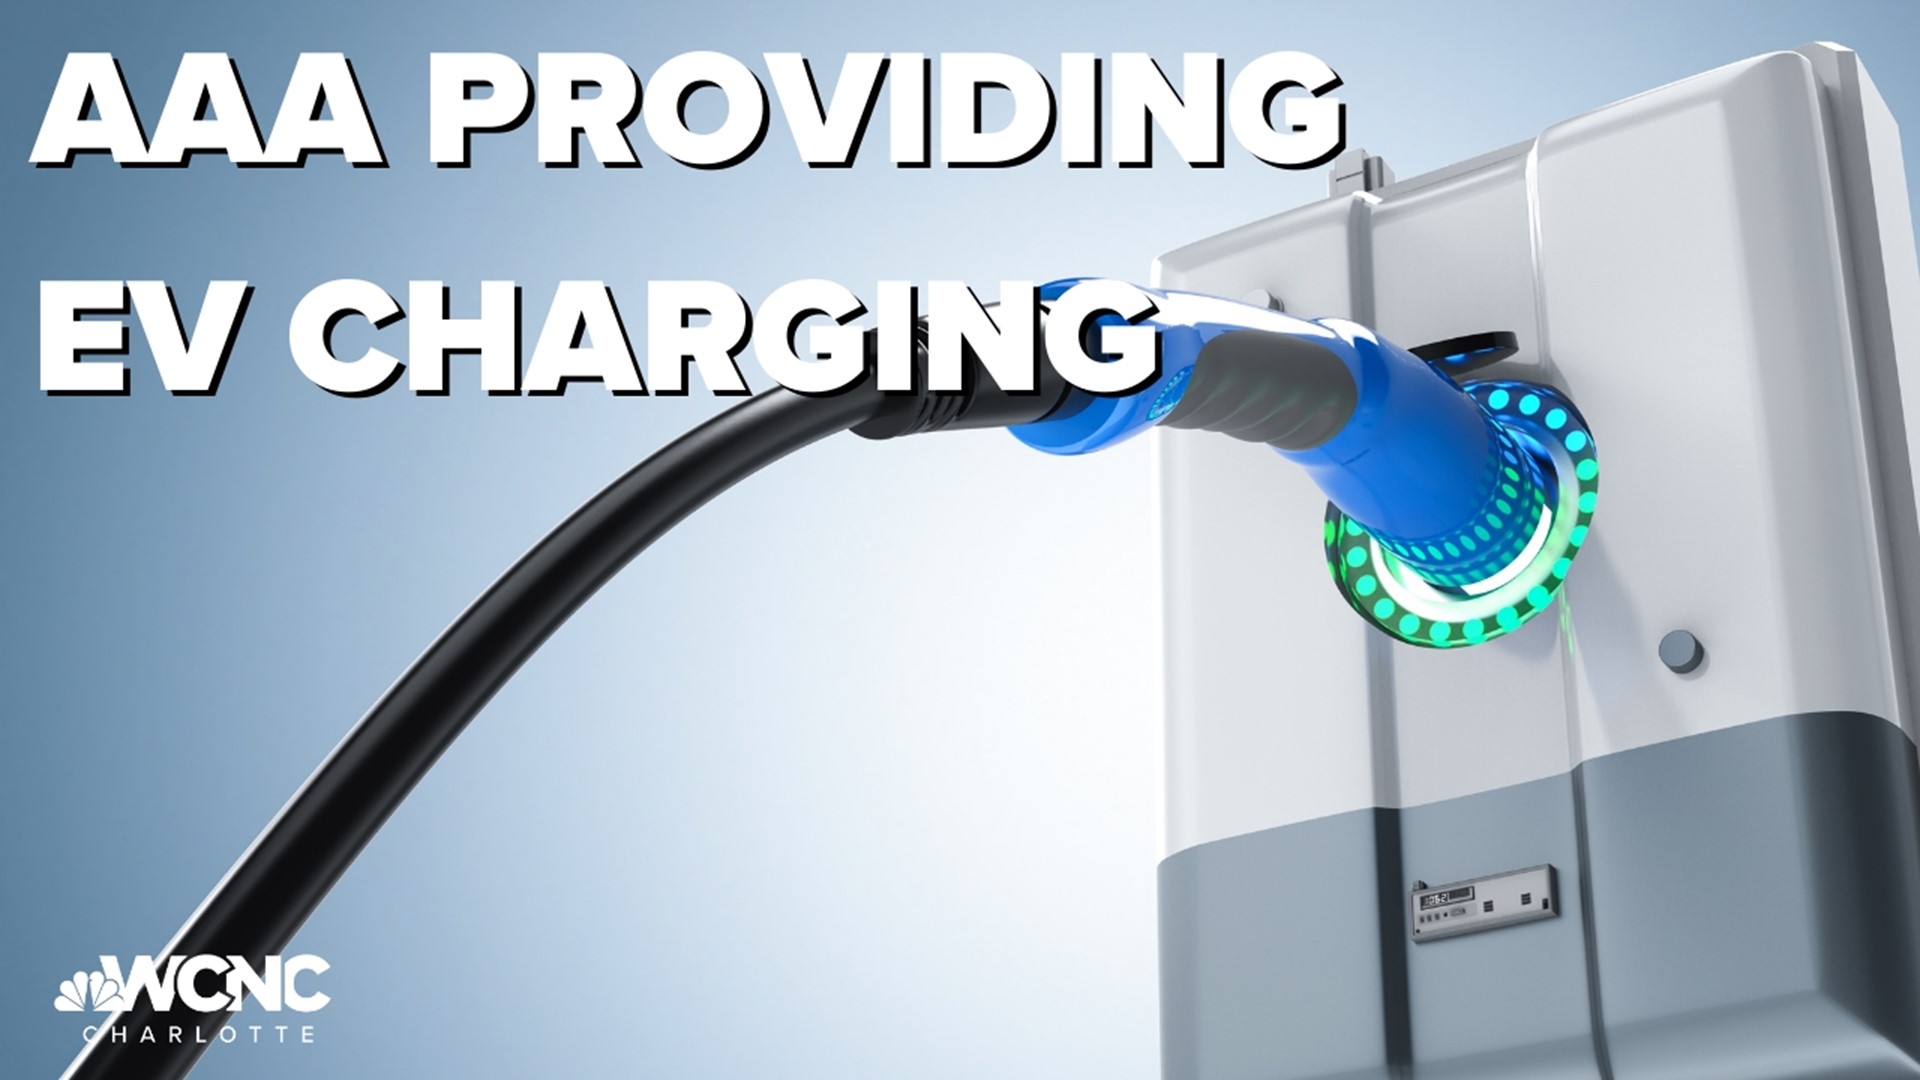 AAA offering EV charging services in Charlotte